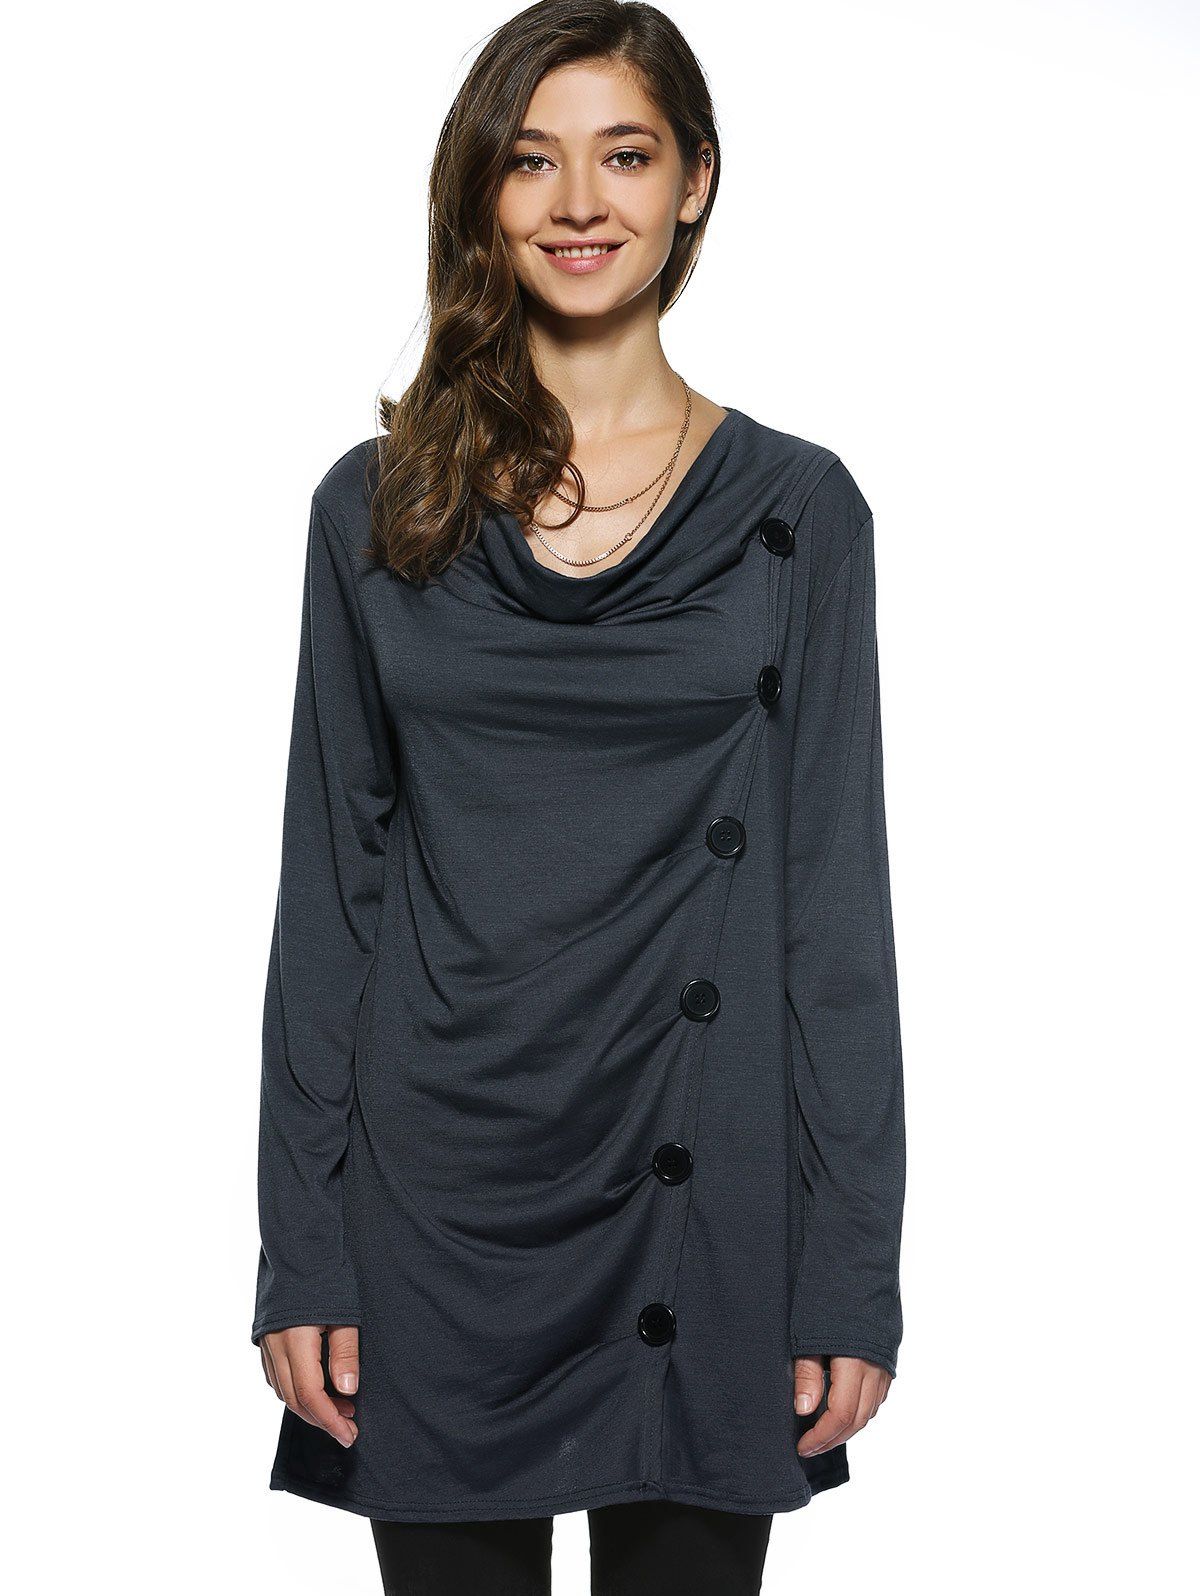 Cowl Neck Ruched Long Blouse, DEEP GRAY, XL in Long Sleeves | DressLily.com